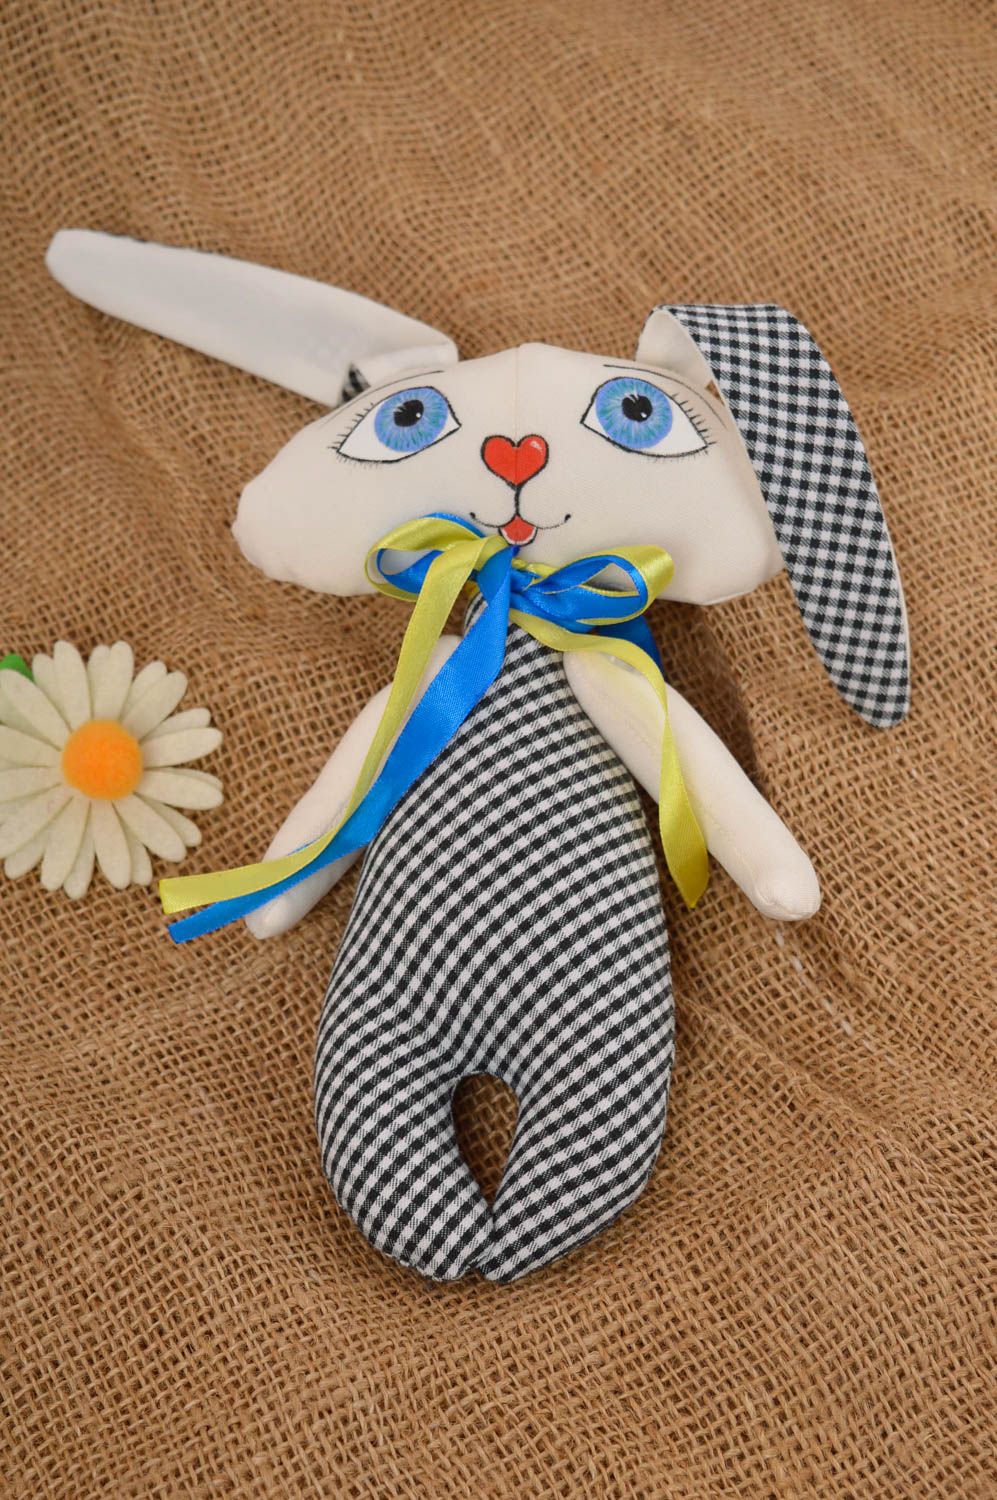 Handmade toy unusual toy gift ideas designer toy for kids soft toy for baby photo 1